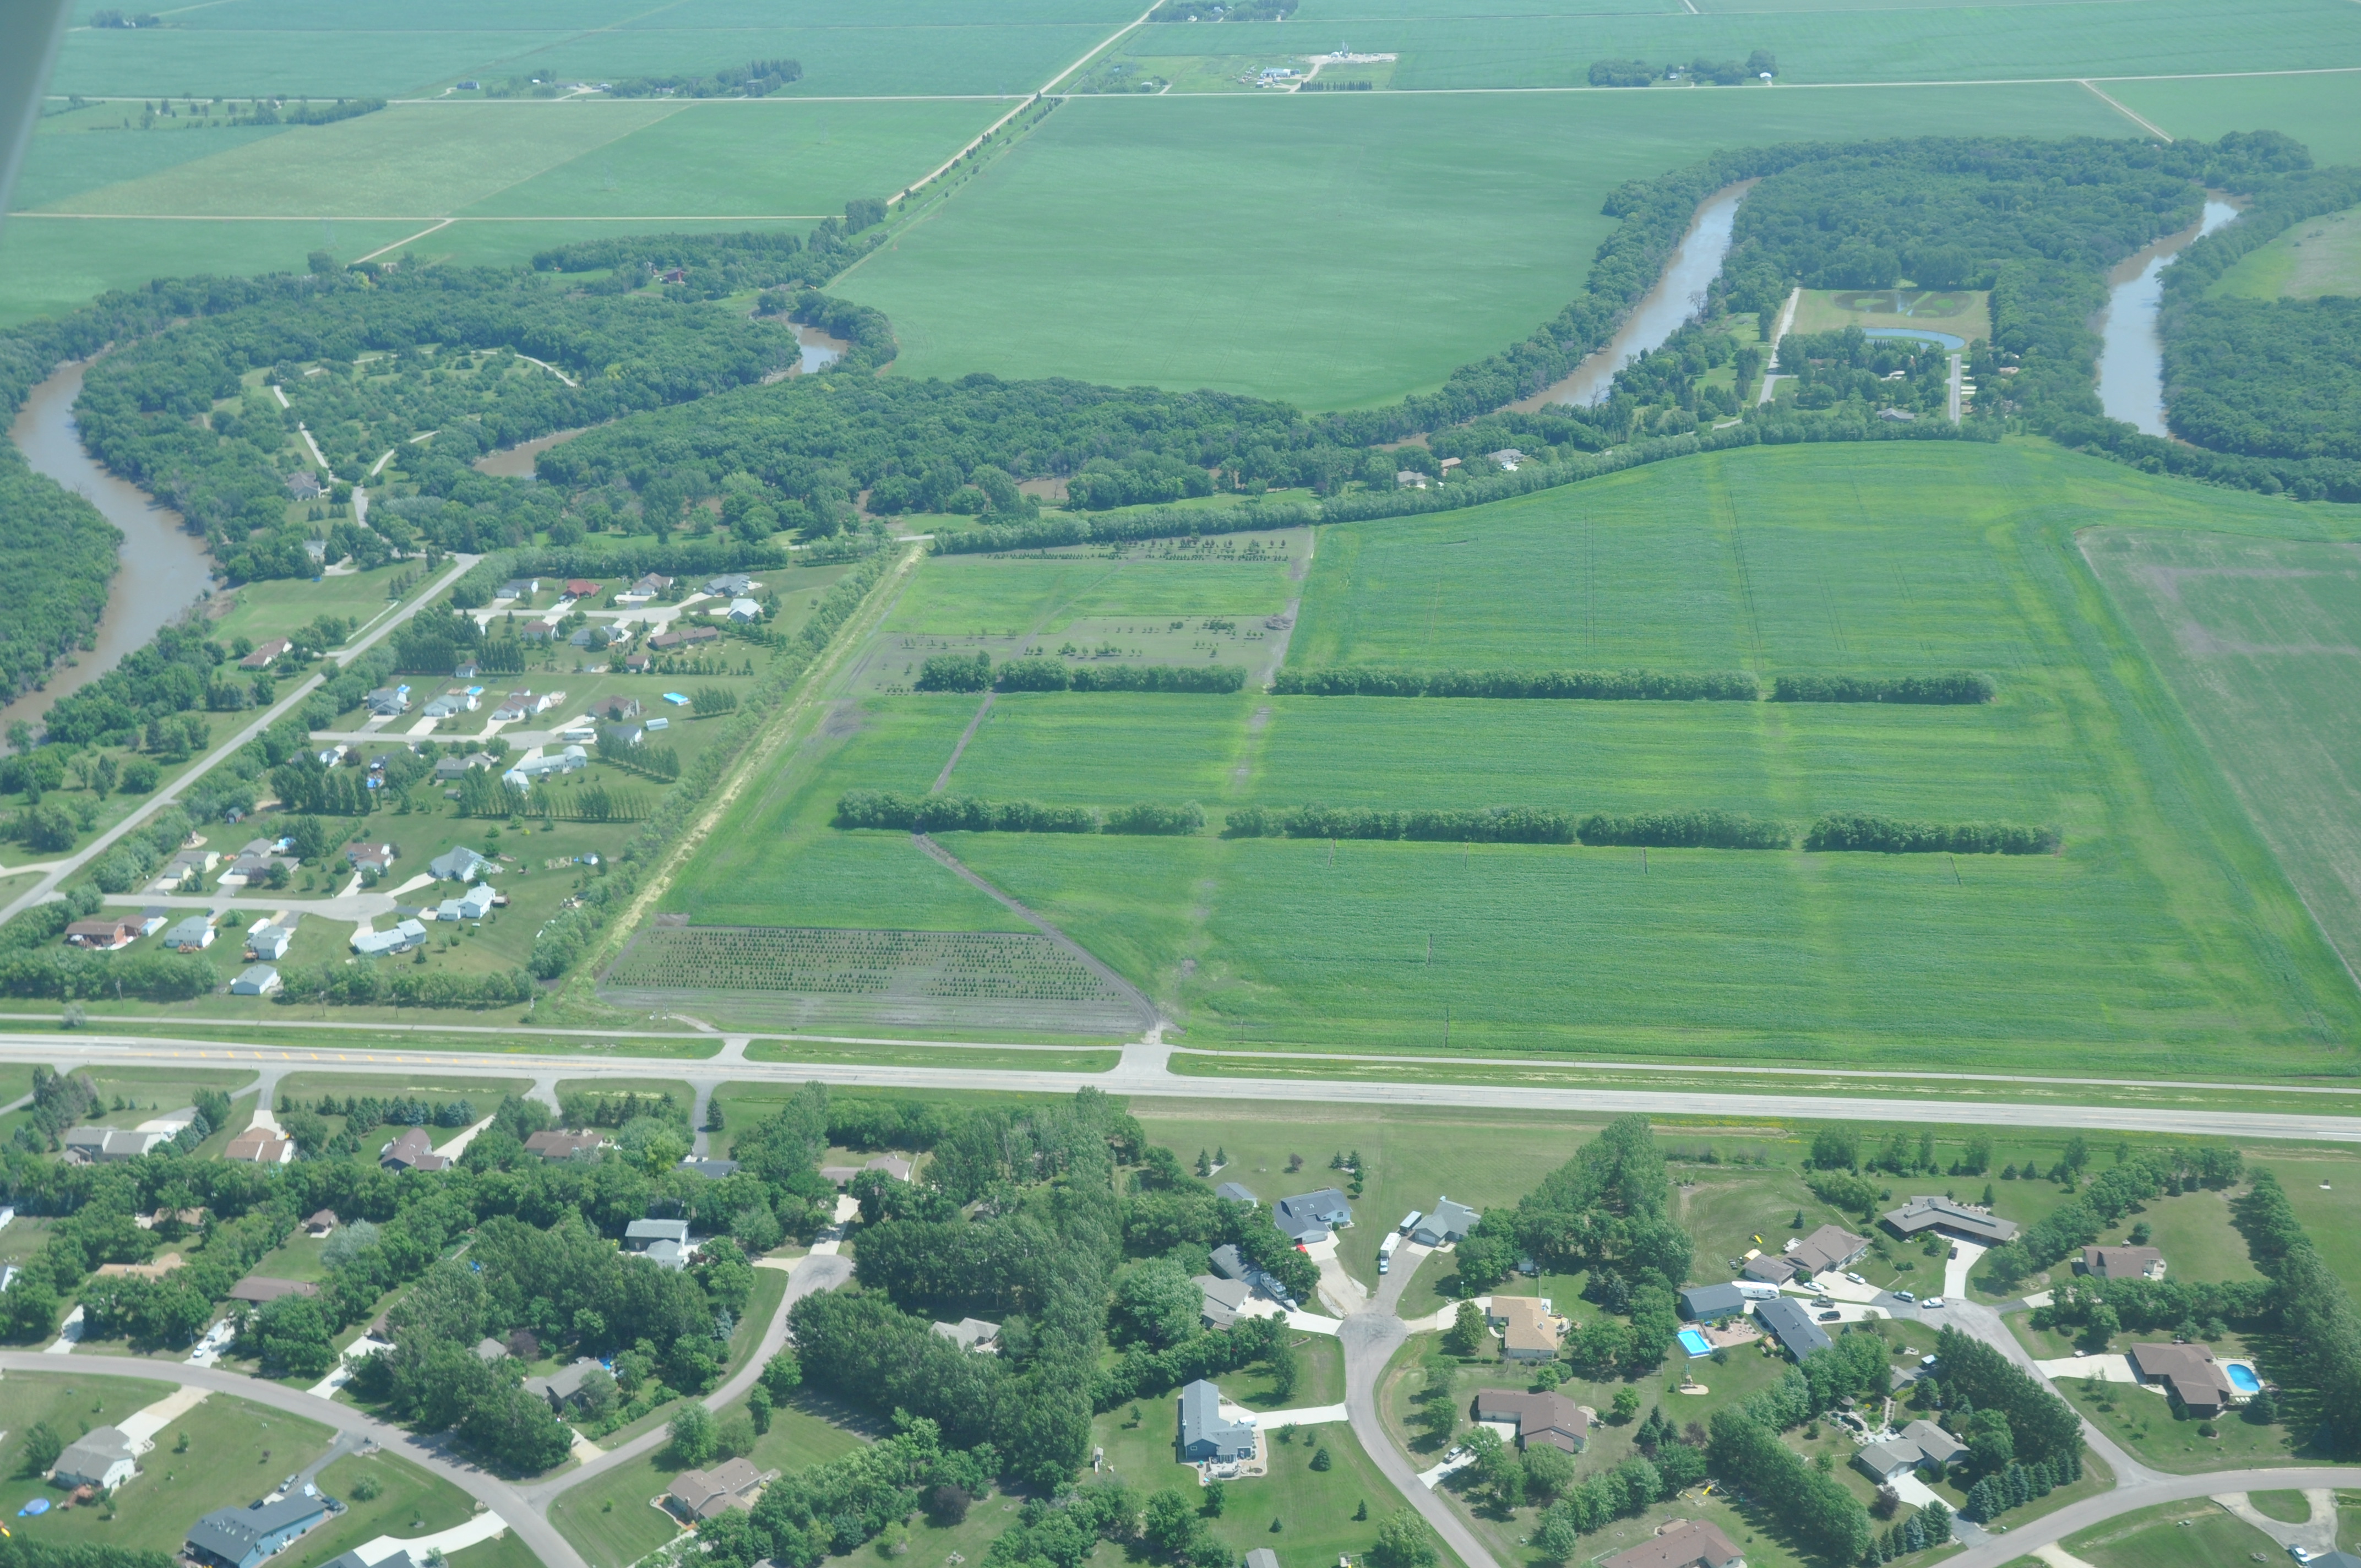 Aerial view of a ND community